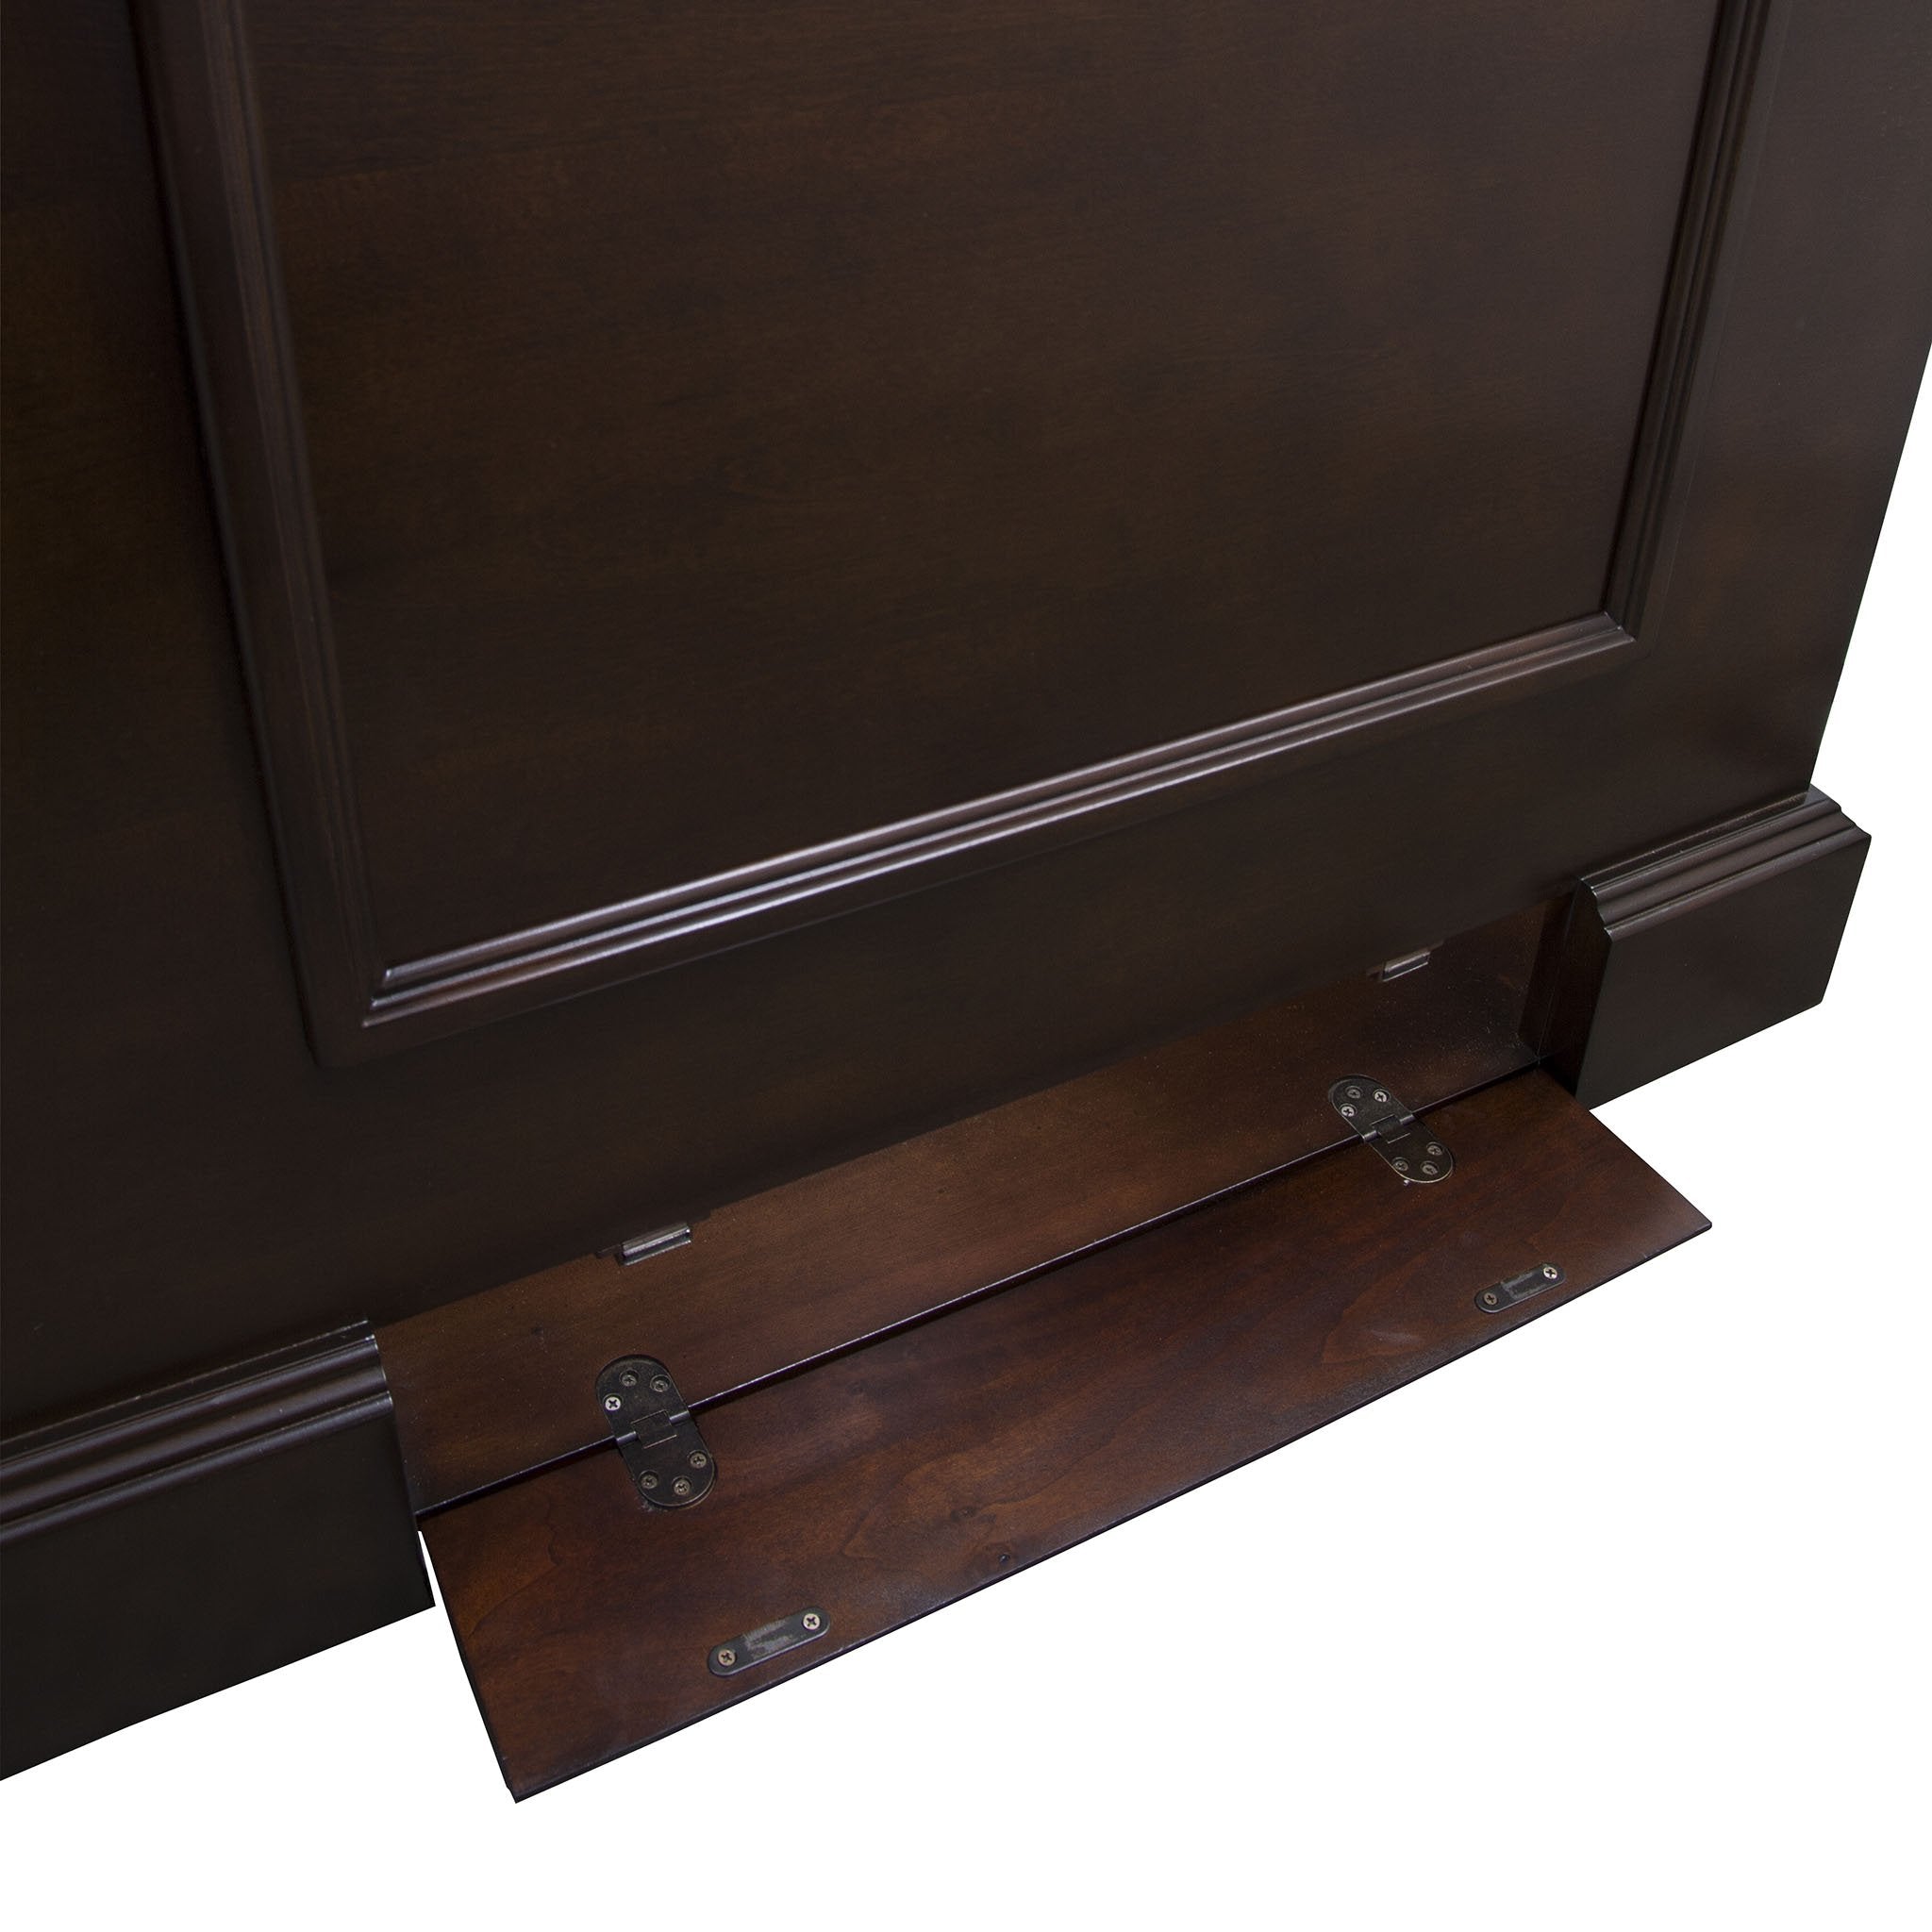 	Grand Elevate 74008 Espresso TV Lift Cabinet for 65 inch Flat screen TVs detail shot of the bottom.